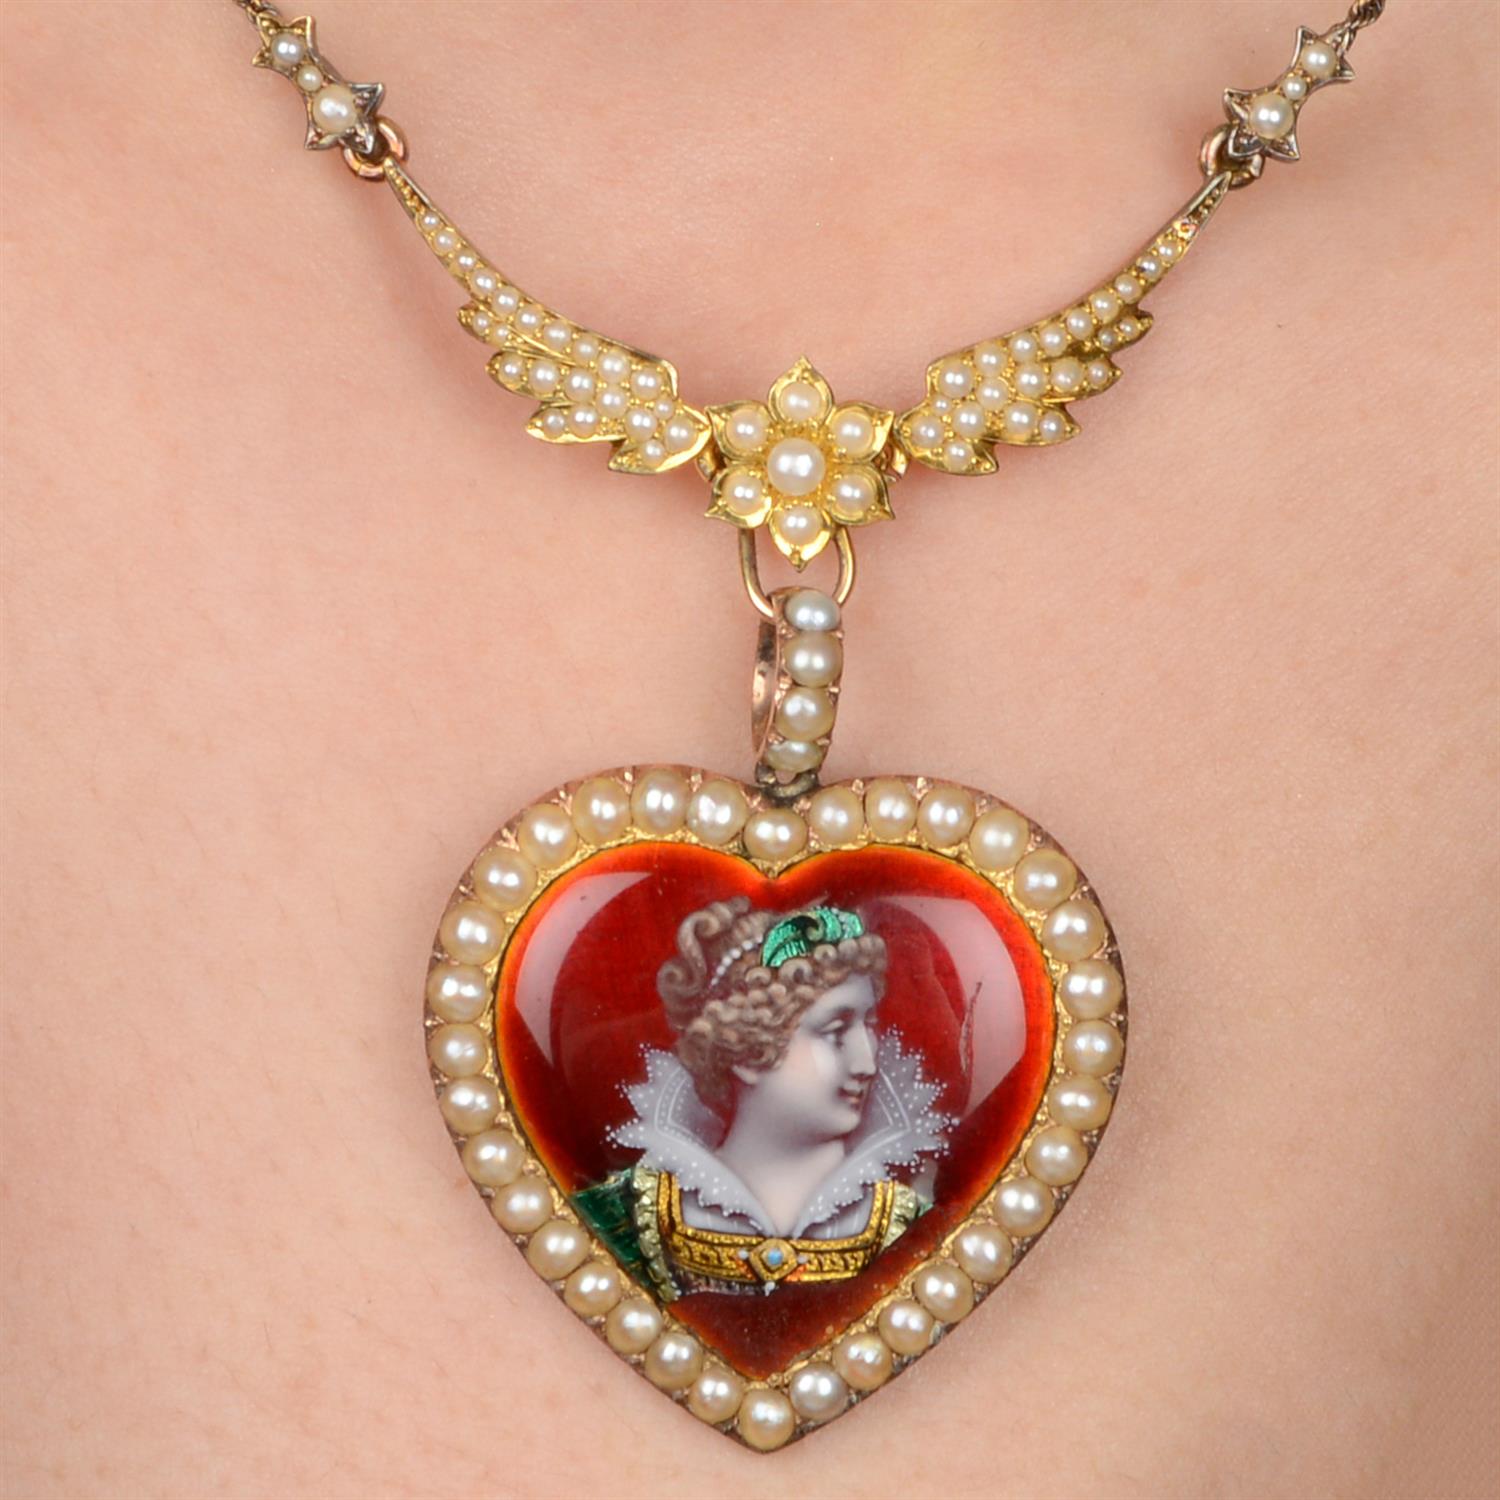 Late 19th century gold enamel heart and wings necklace